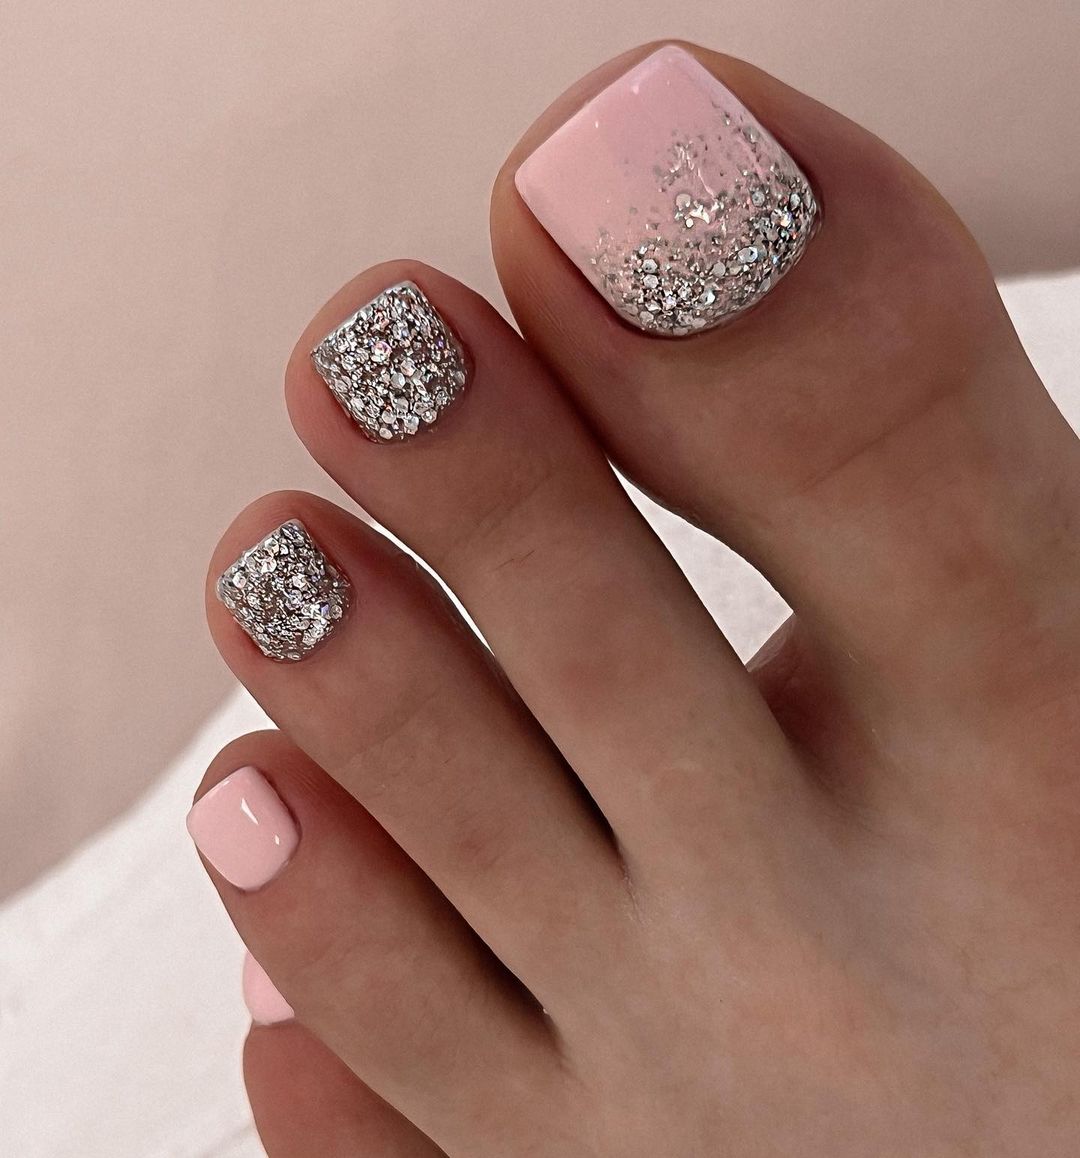 Pink Pedicure with Glitter